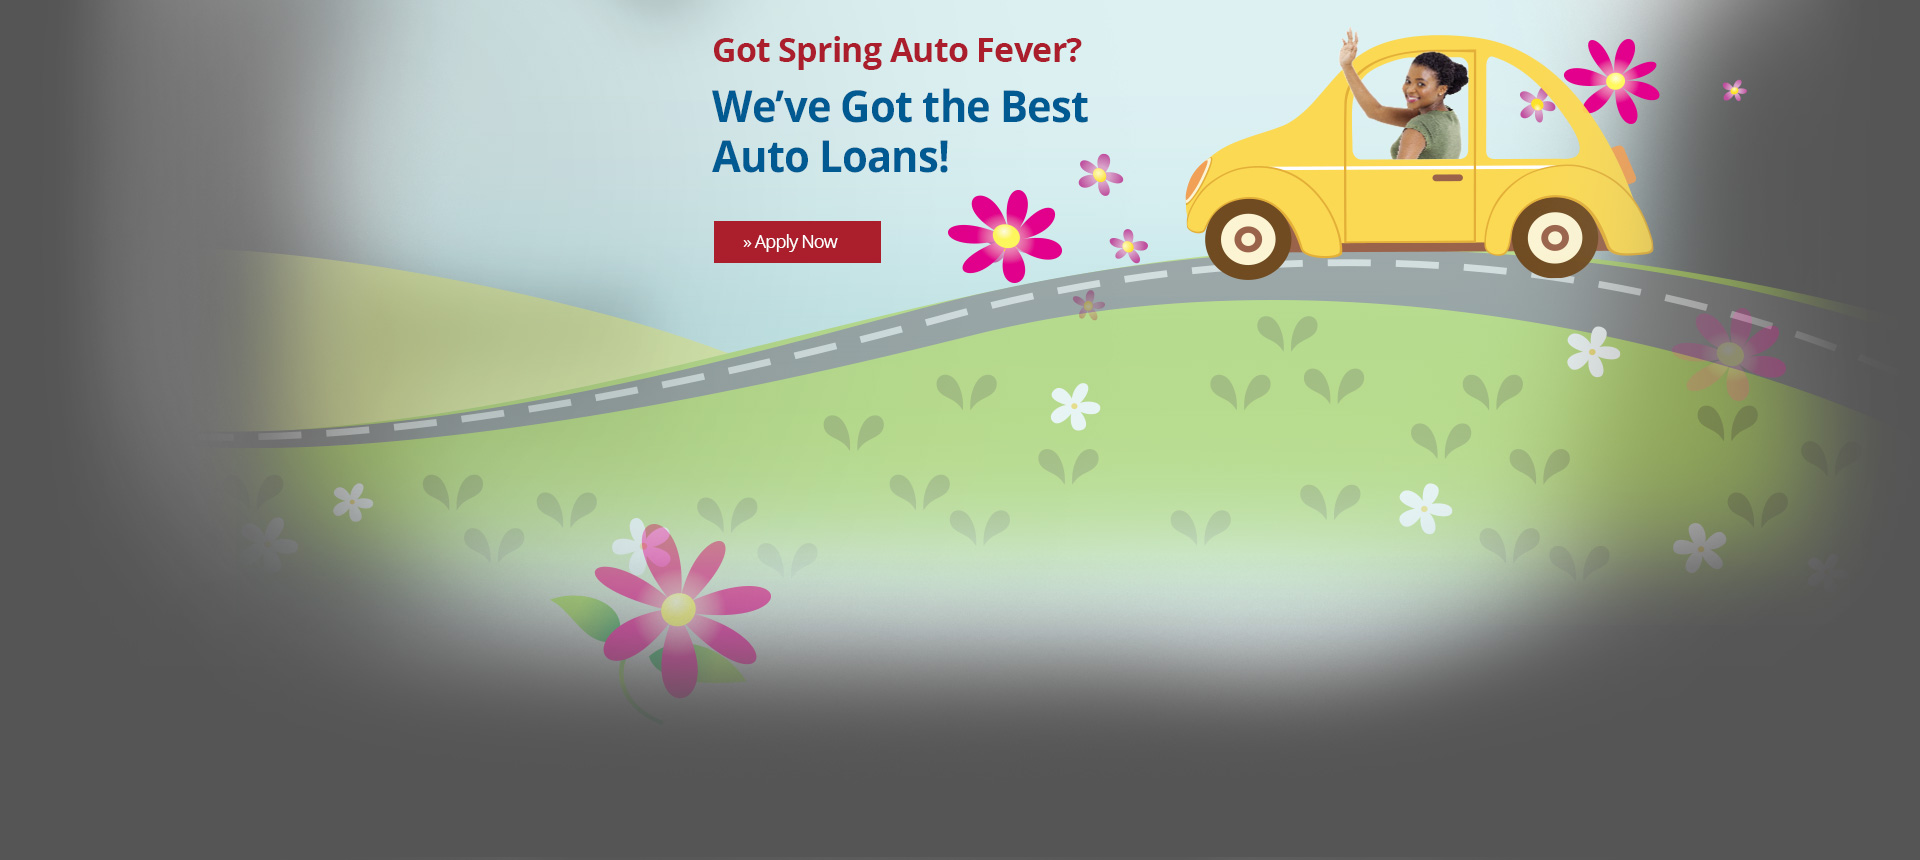 Spring into a low rate auto loan